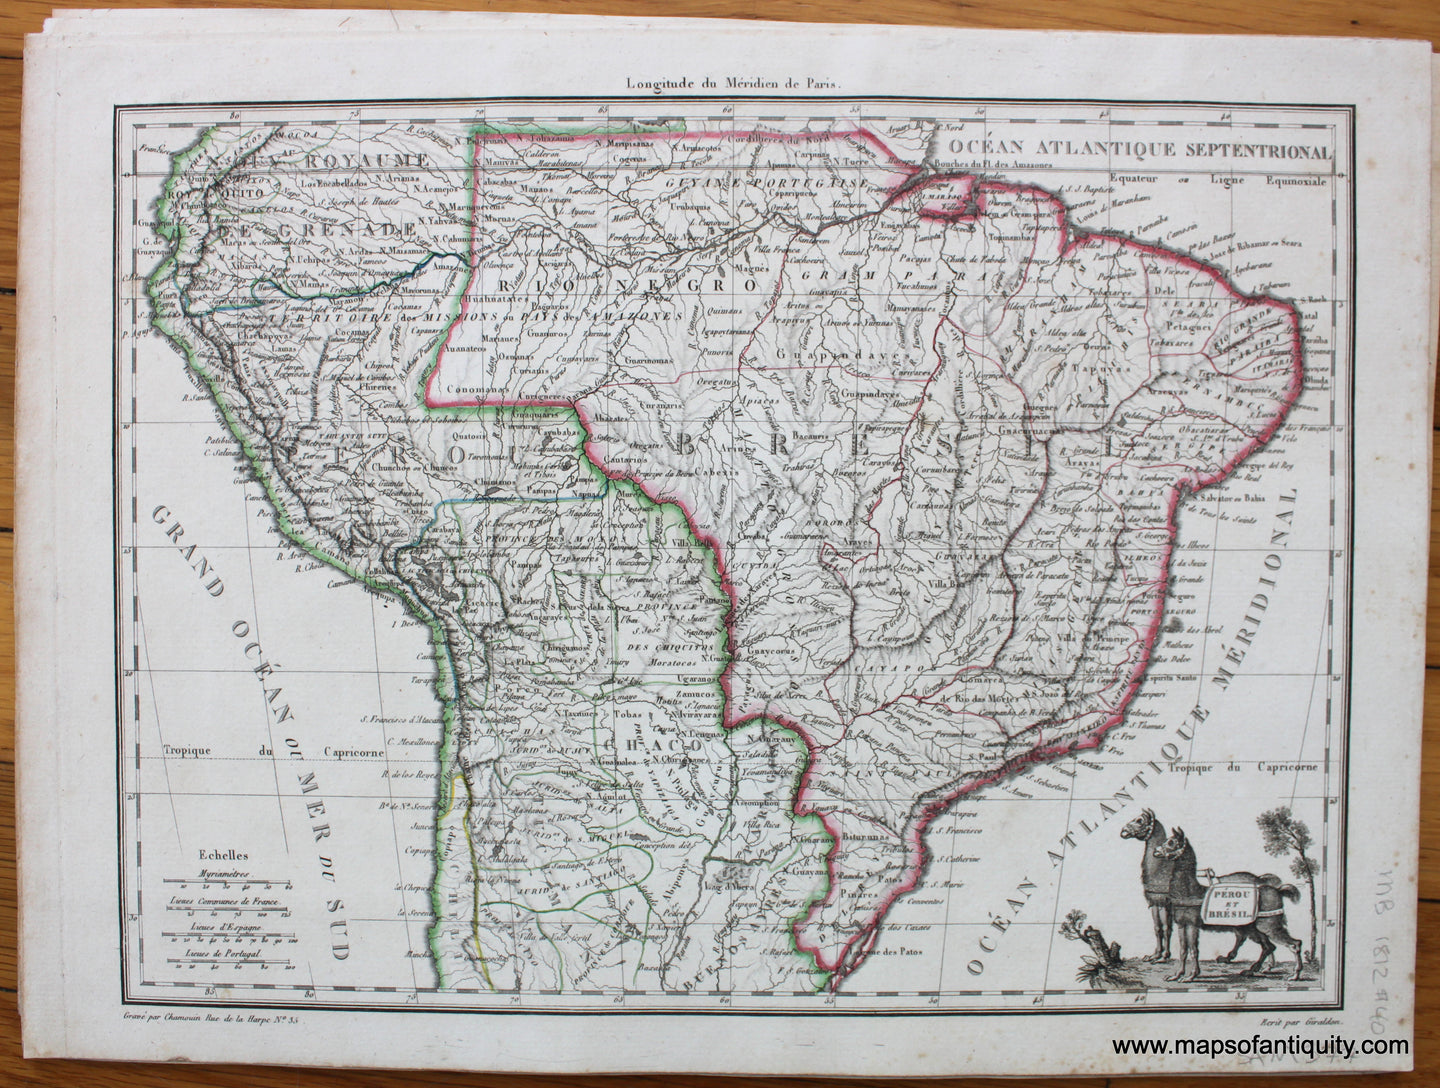 Antique-Hand-Colored-Map-Perou-et-Bresil-Part-of-South-America-1812-Malte-Brun-Lapie-1800s-19th-century-Maps-of-Antiquity